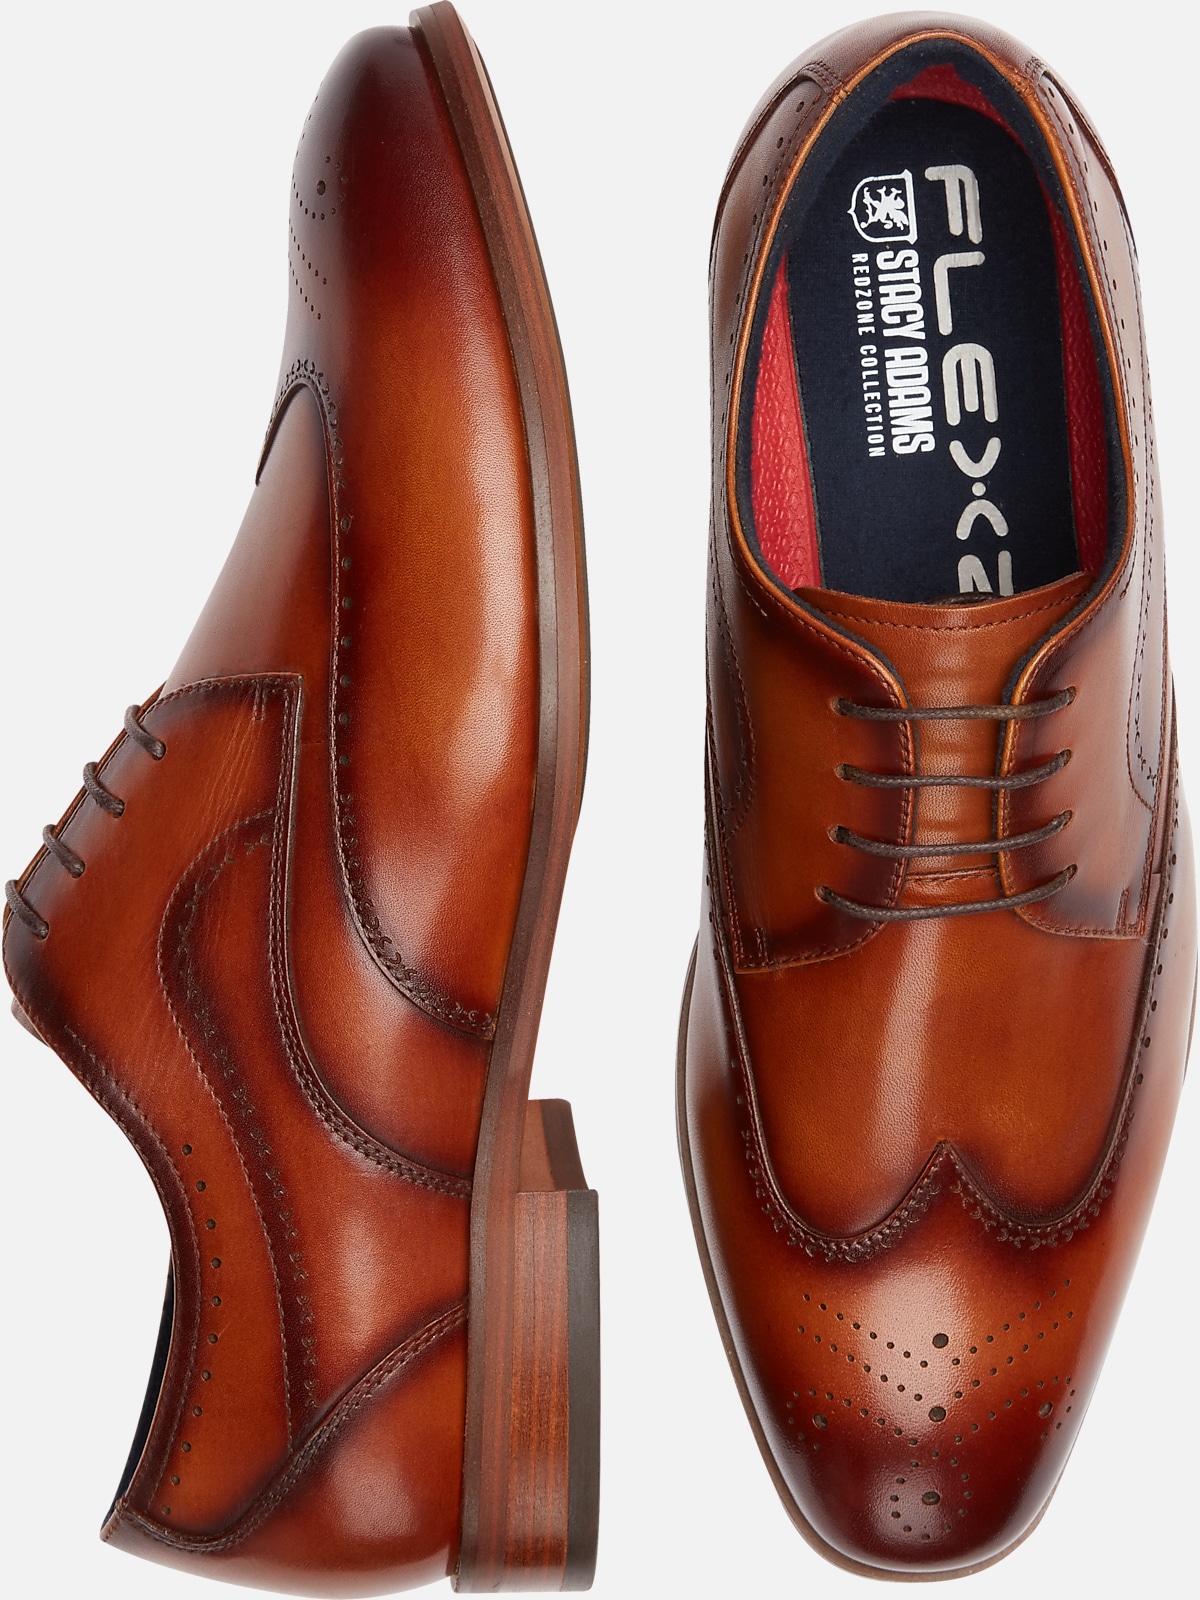 Stacy Adams Brayden Wingtip Lace Up Shoes | All Clearance $39.99| Men's ...